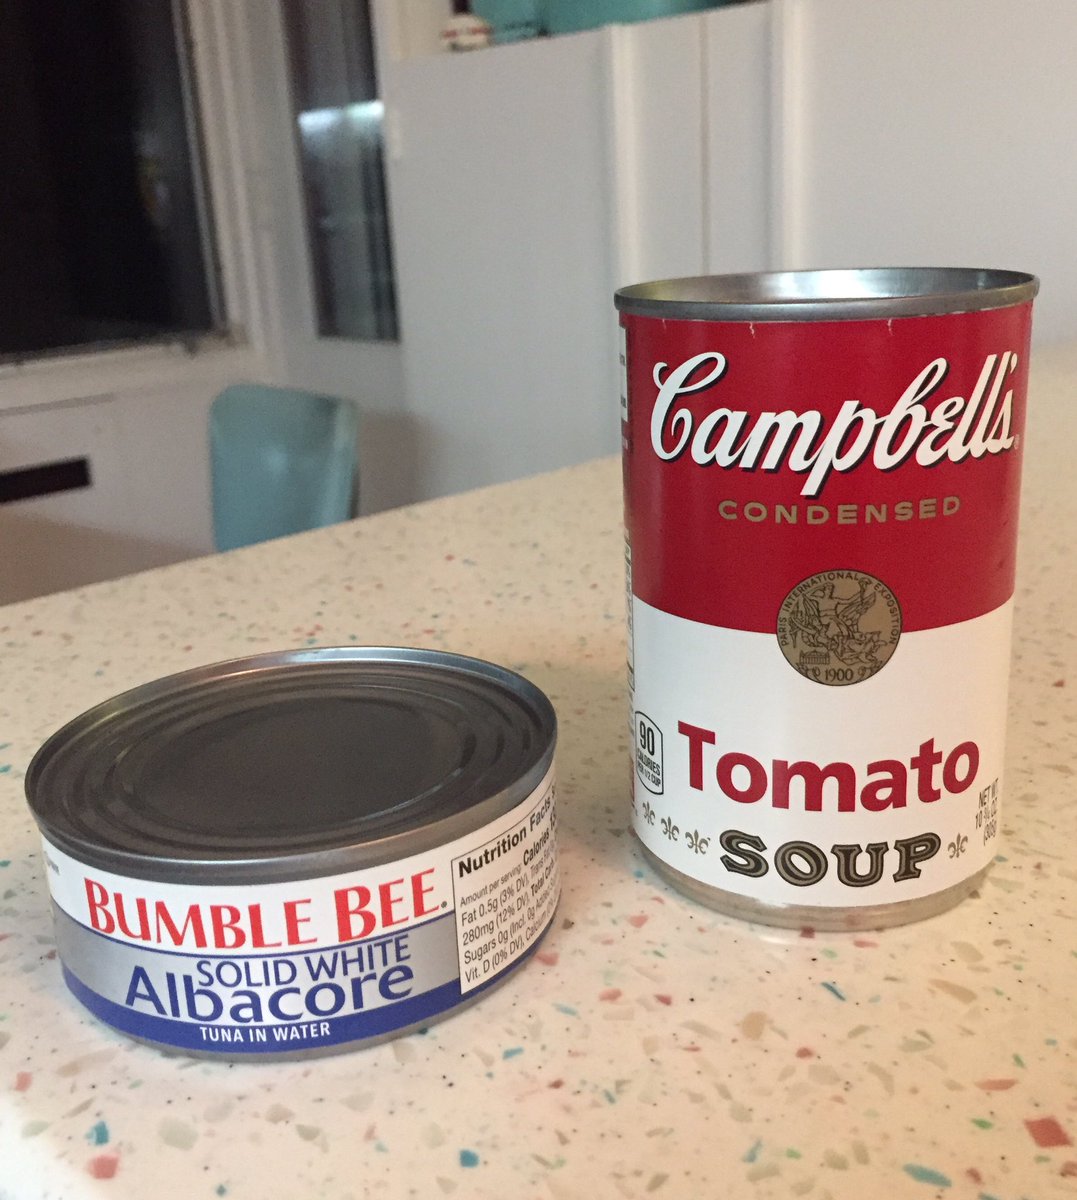 From my cold dead hands. 

#SoupForMyFamily #bumblebeetuna 
#Bumblebee